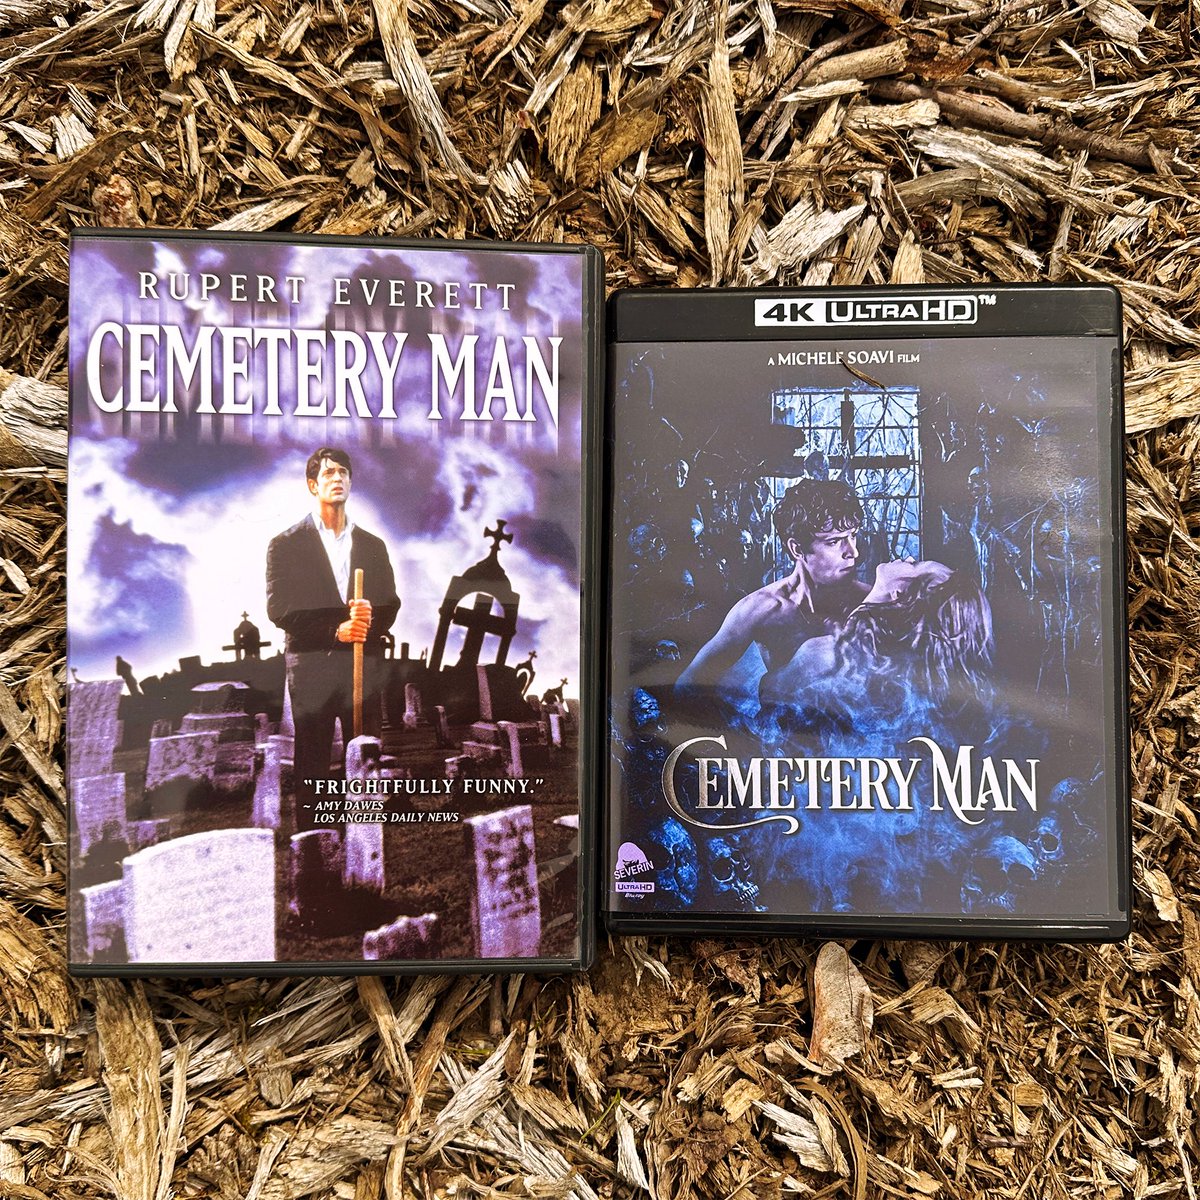 Happy to upgrade my old Anchor Bay DVD of the criminally underrated Cemetery Man to @SeverinFilms's ravishing 4K UHD.